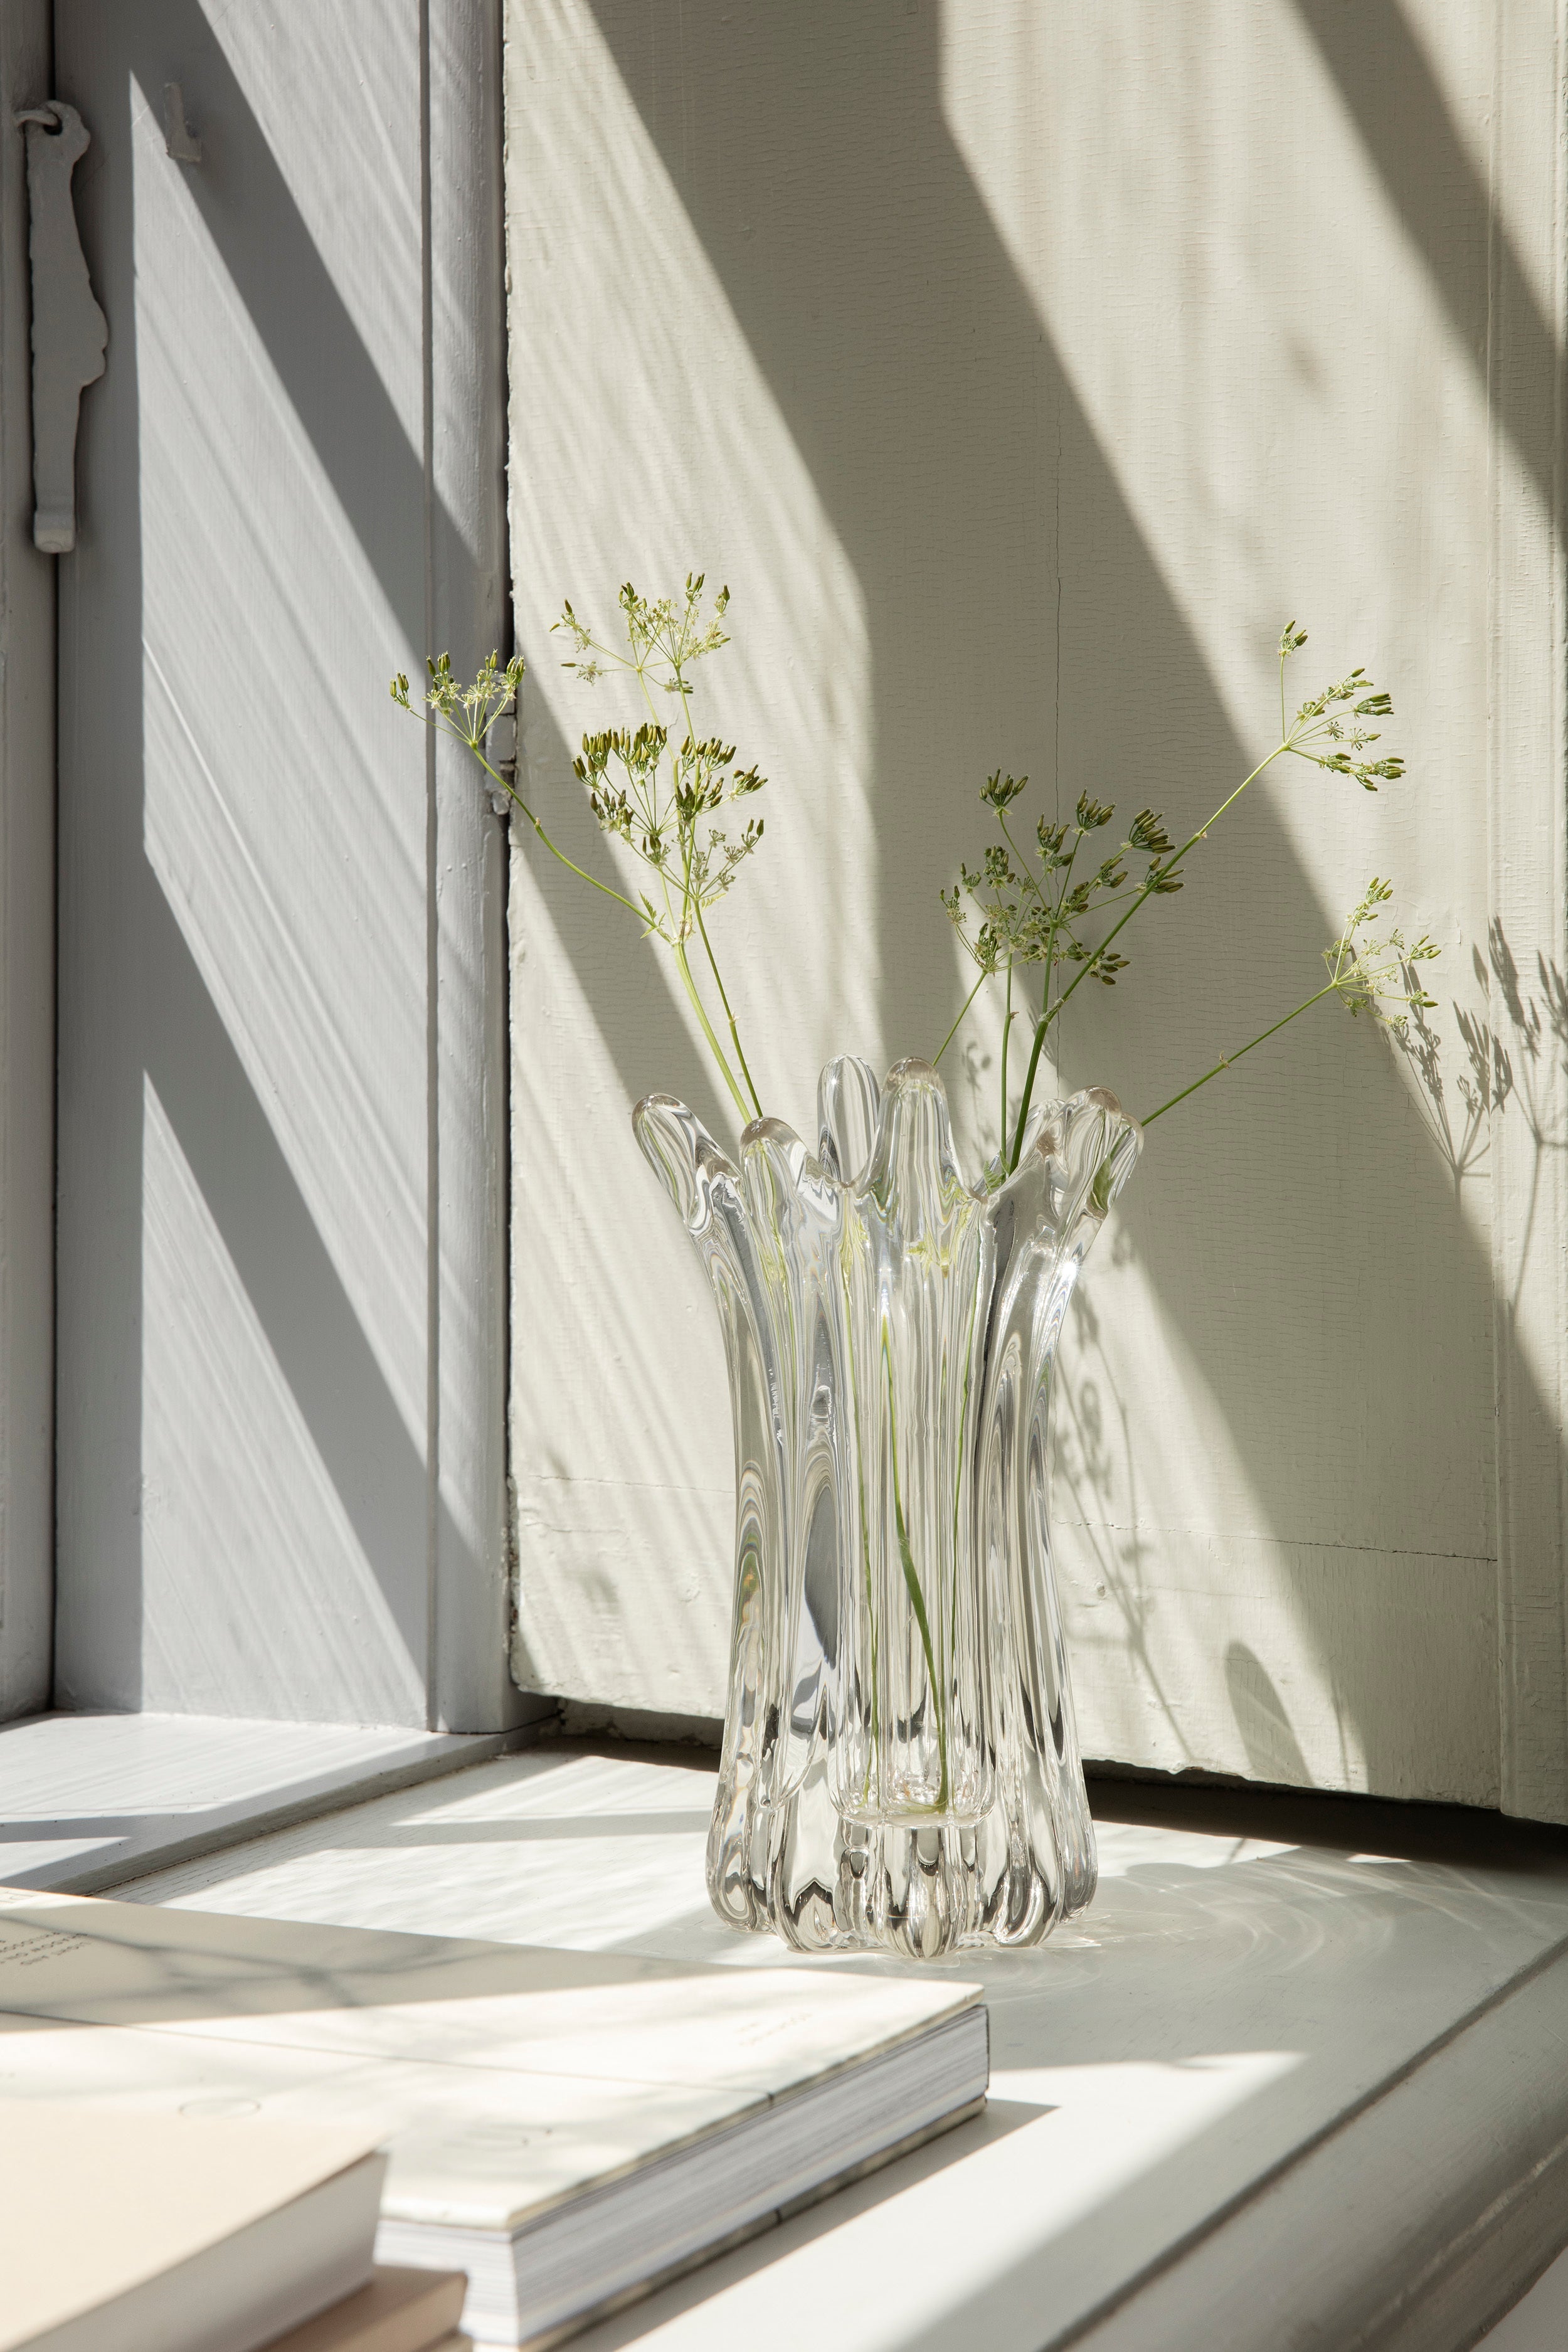 The Holo Vase by ferm LIVING with green flowers on a windowsill.